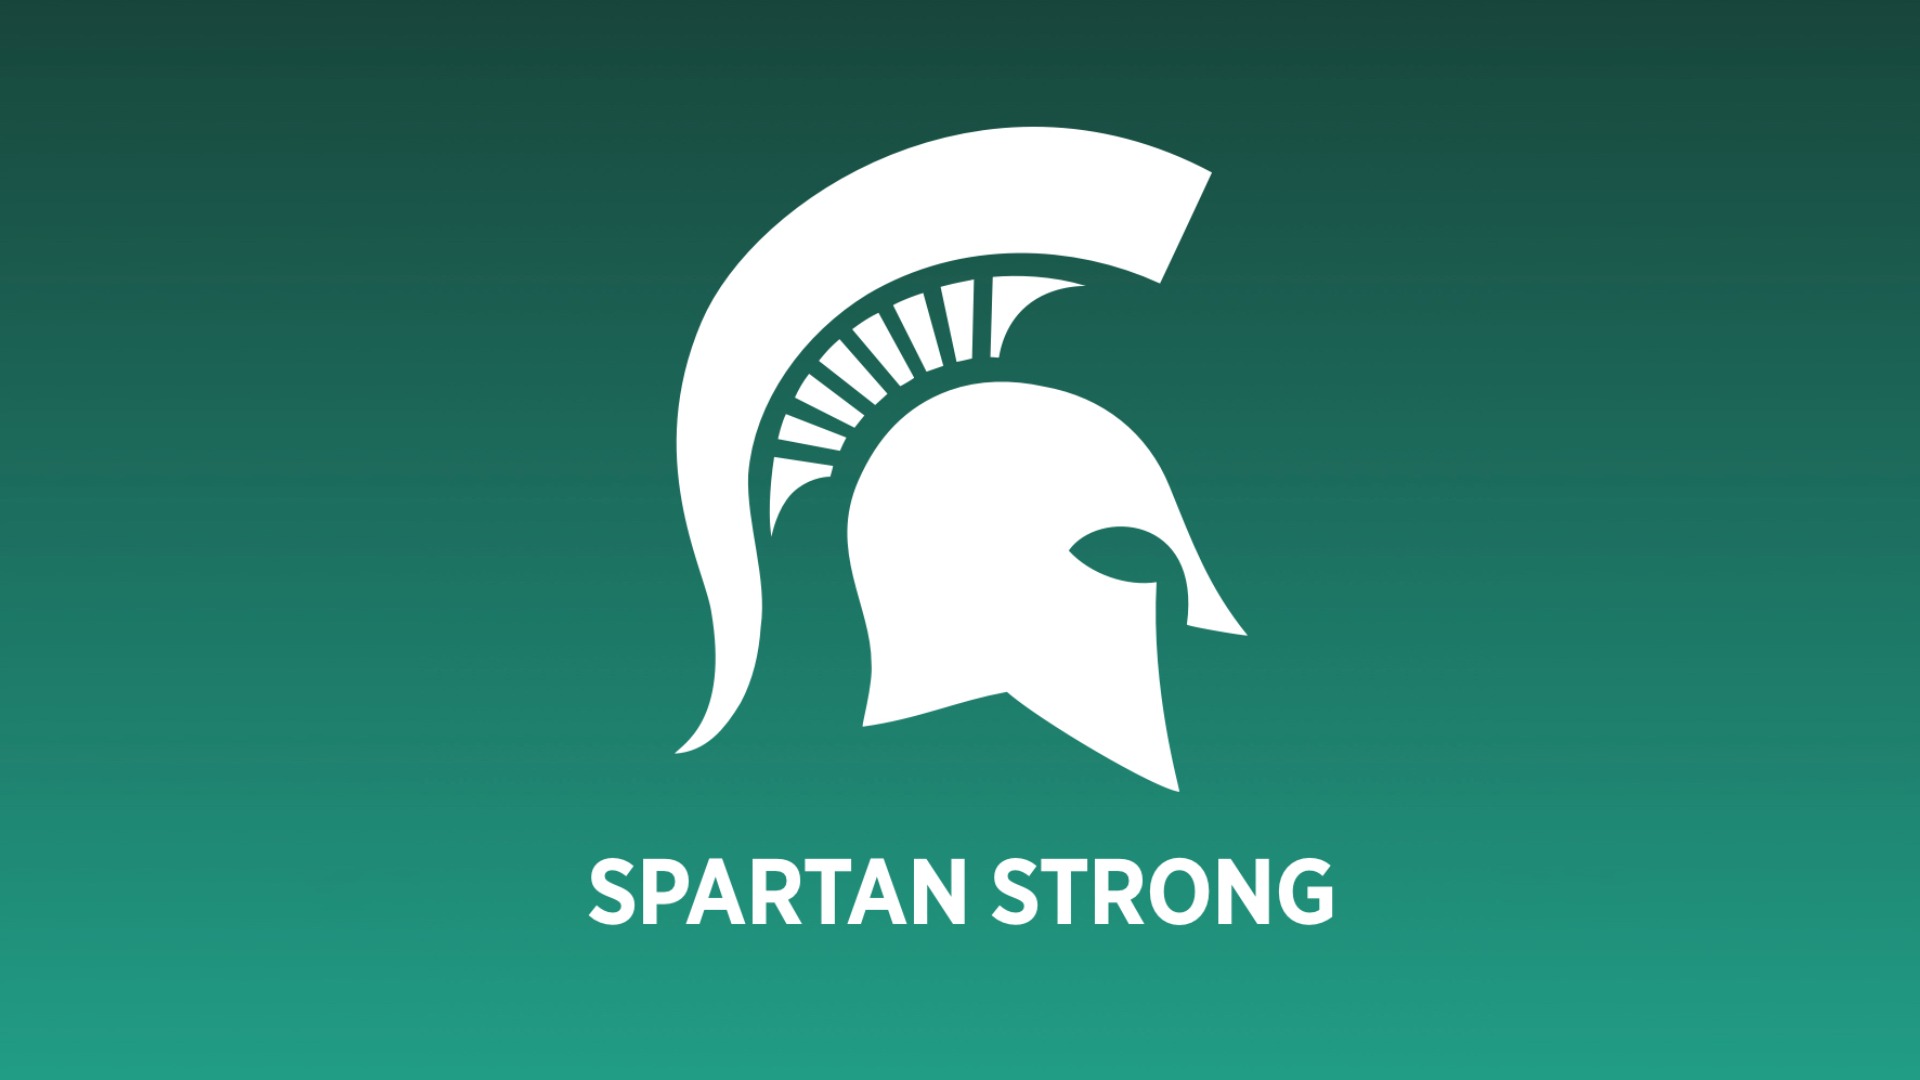 SpartanStrong graphic